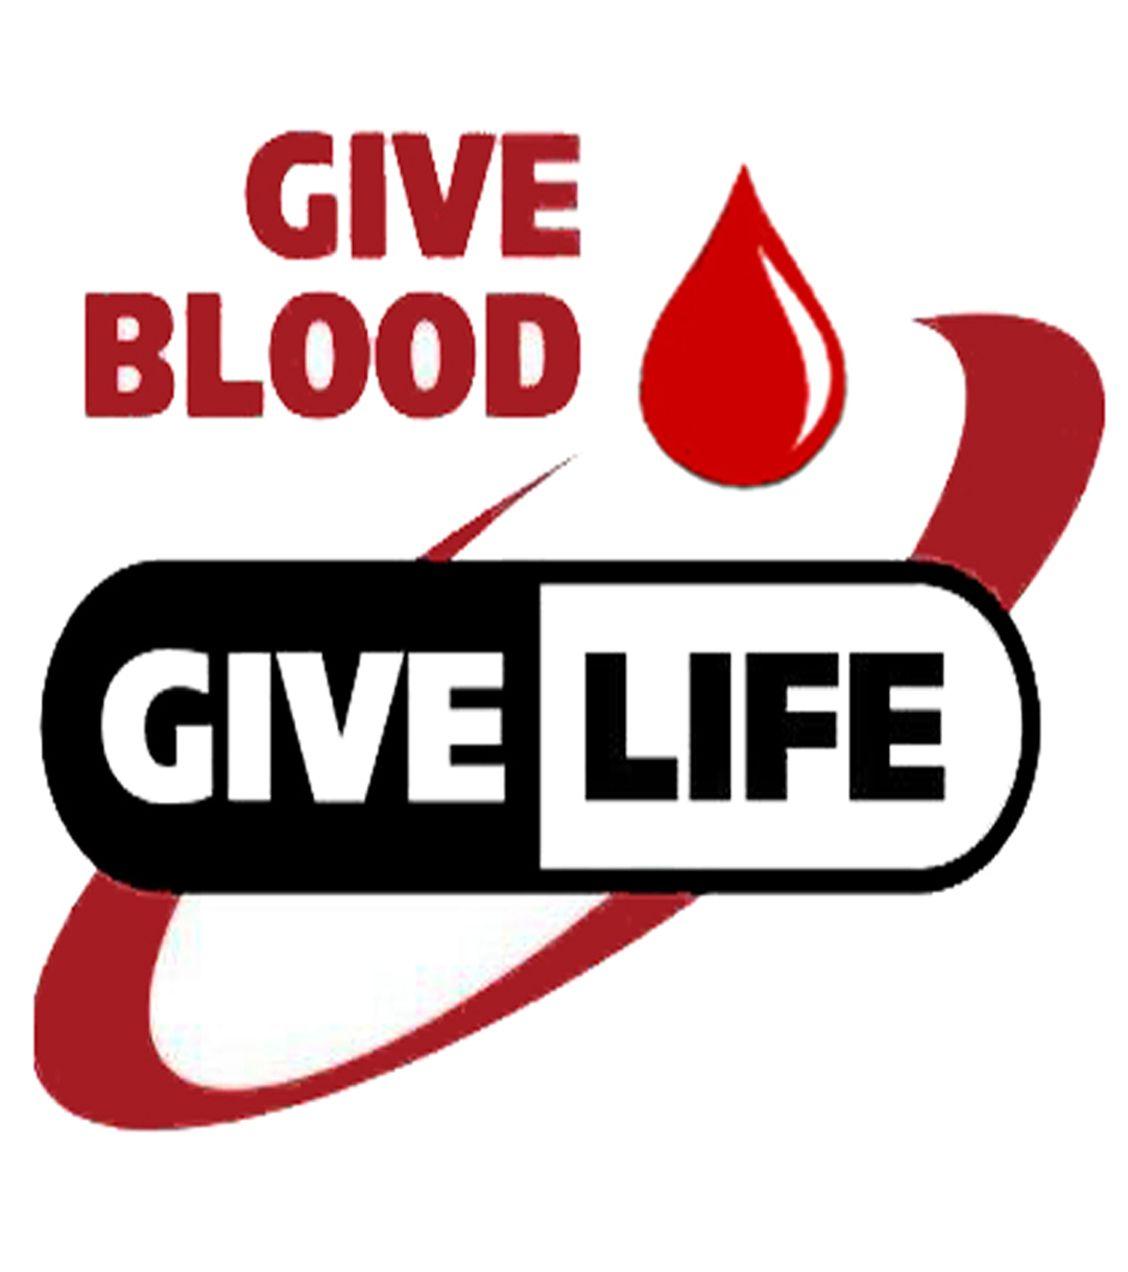 Blood Drive Logo - Iowa Valley hosts Blood Drive April 10 at MCC Valley